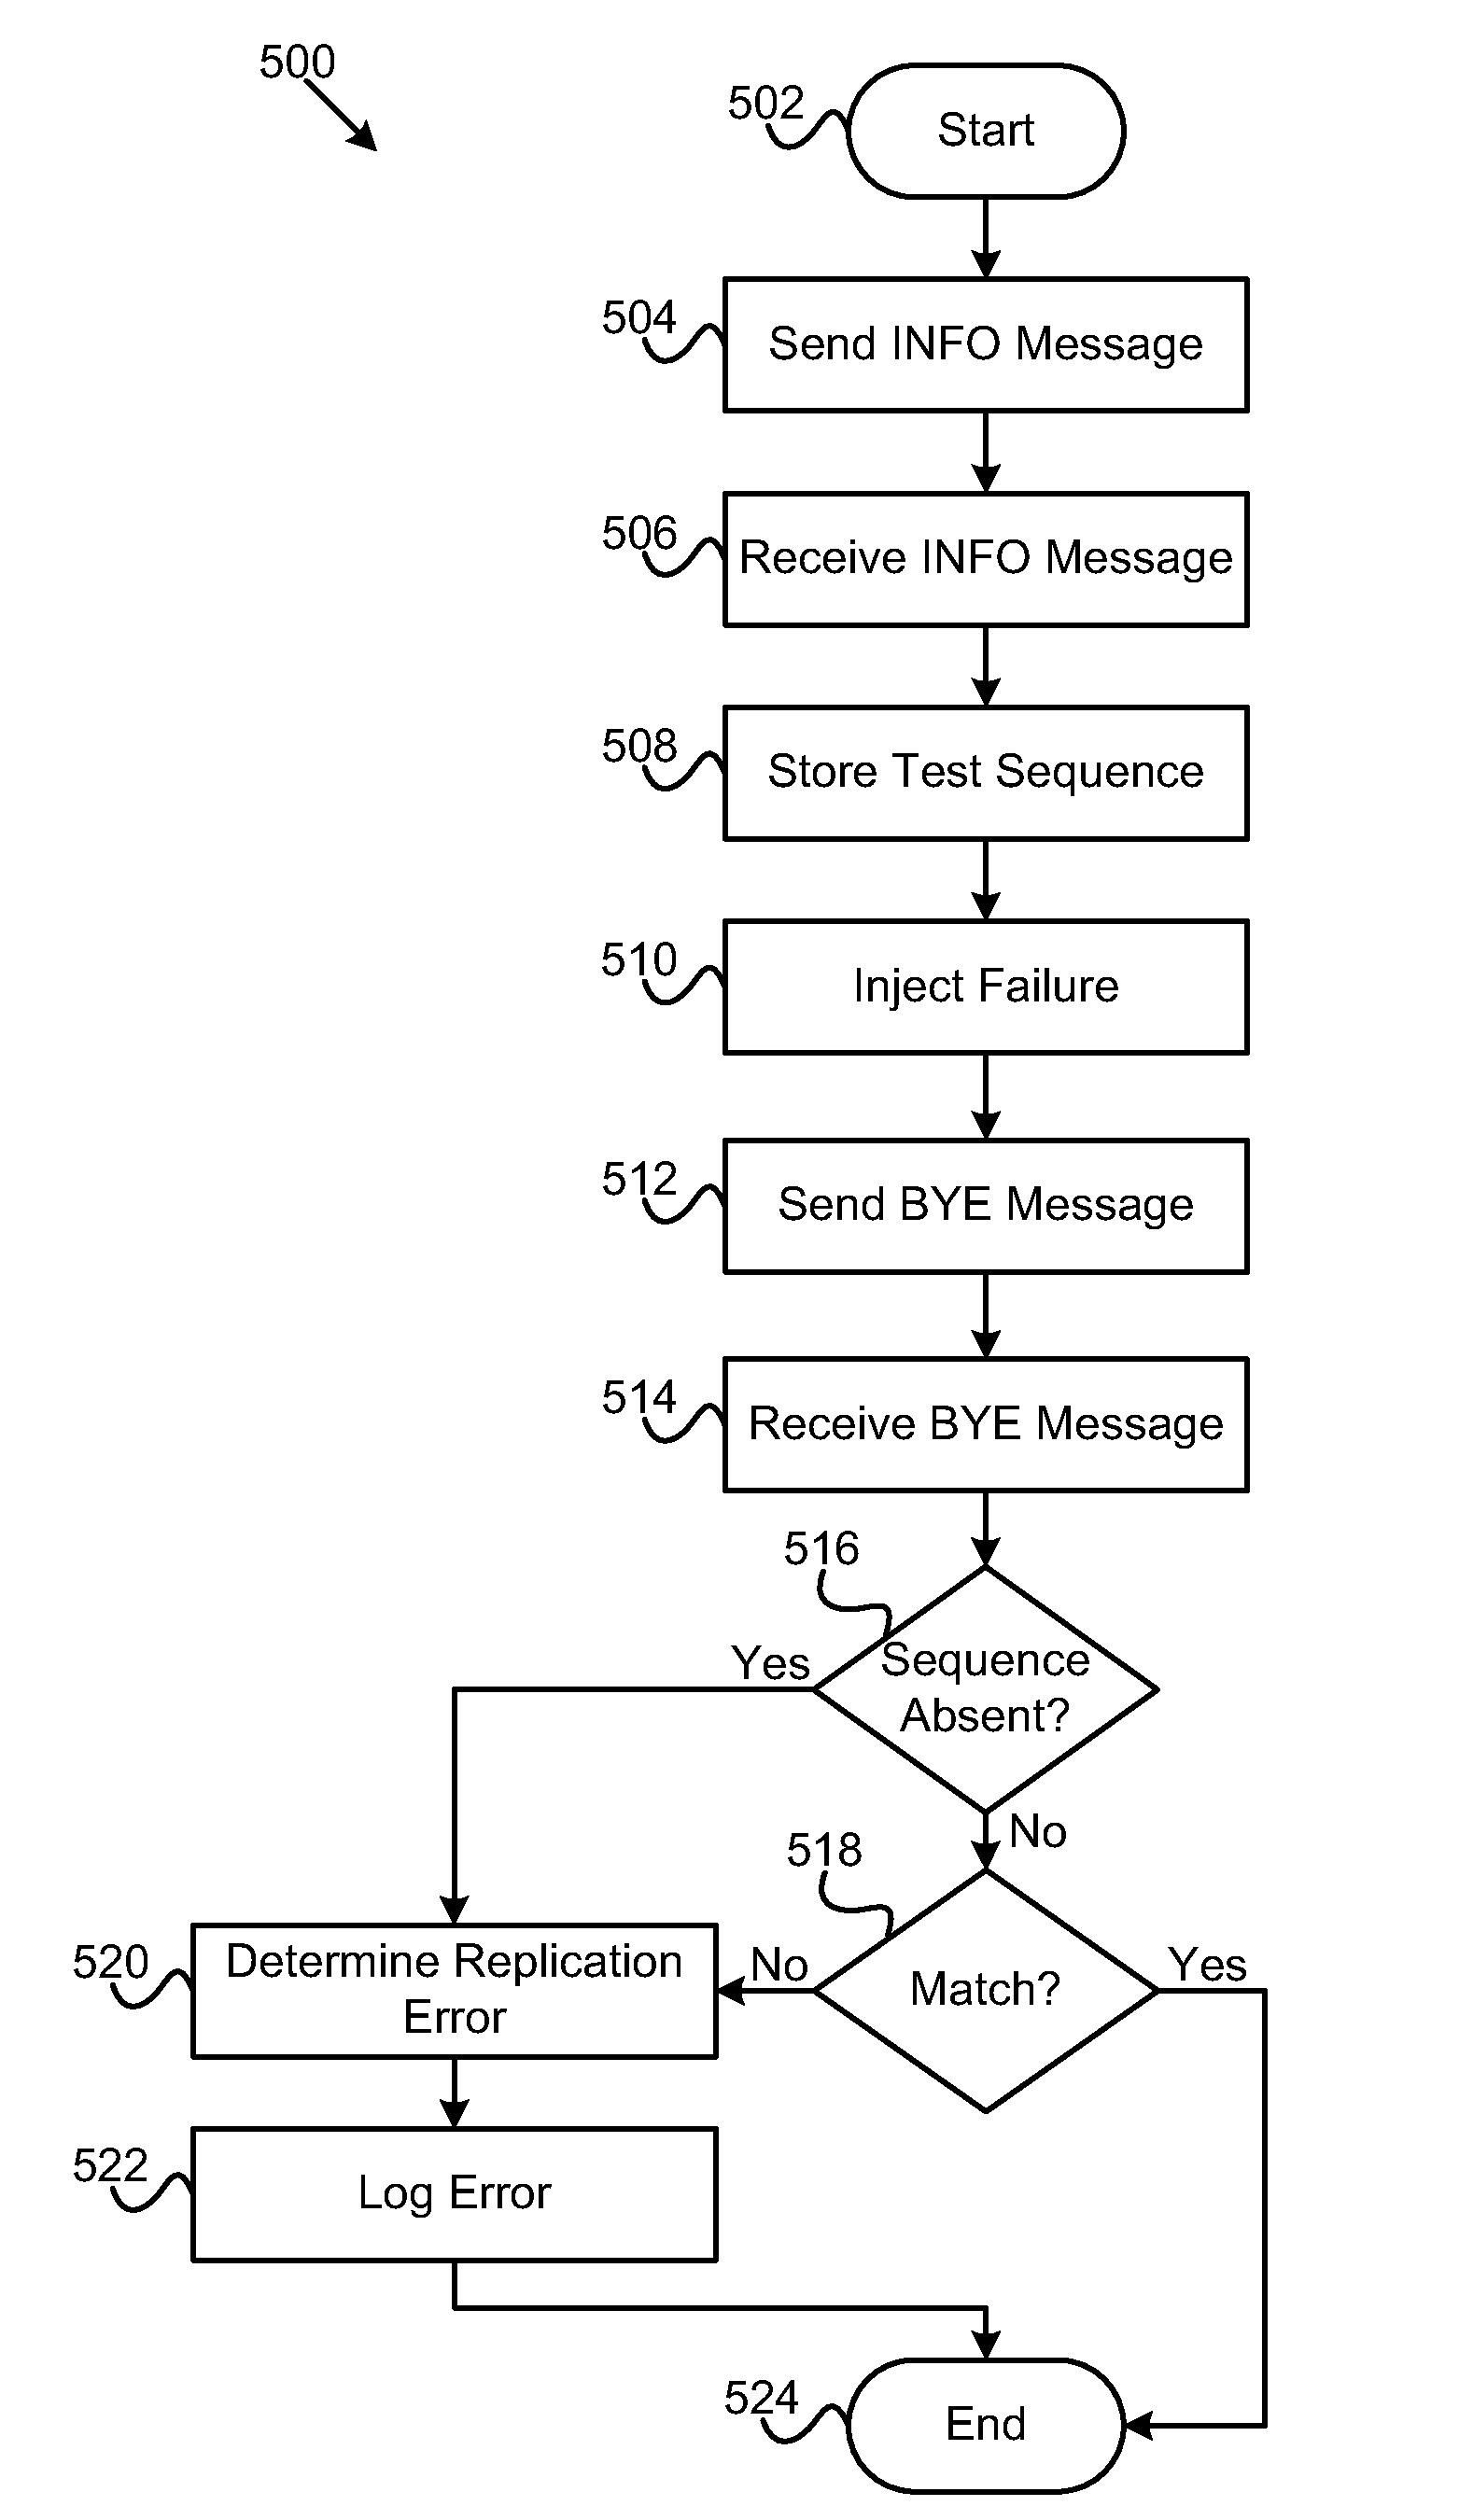 Apparatus, system, and method for validating application server replication errors